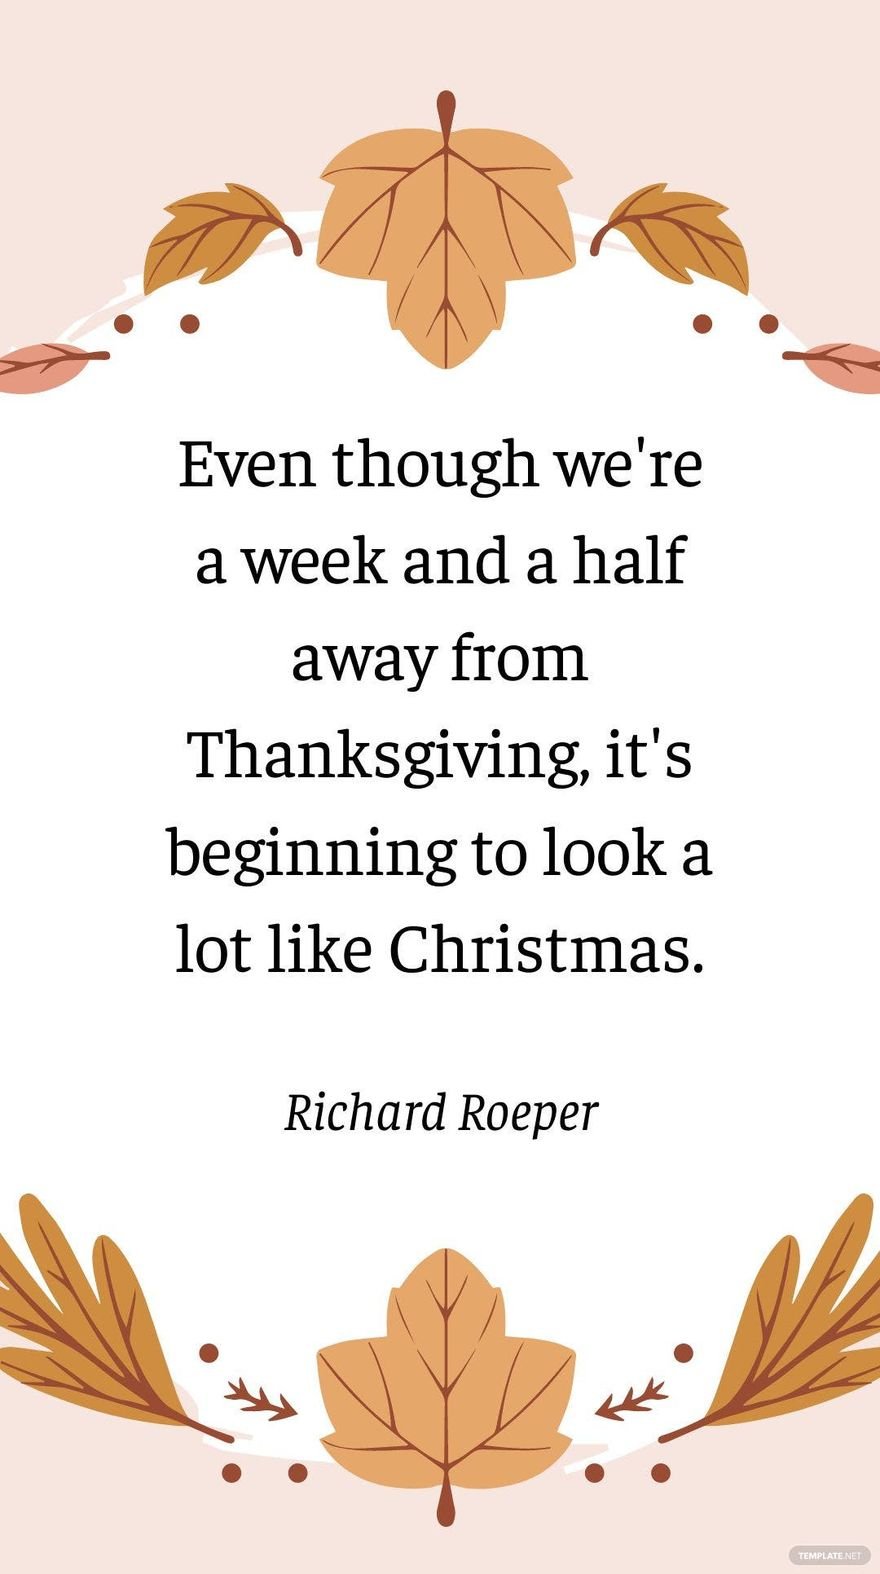 Free Richard Roeper - Even though we're a week and a half away from Thanksgiving, it's beginning to look a lot like Christmas.